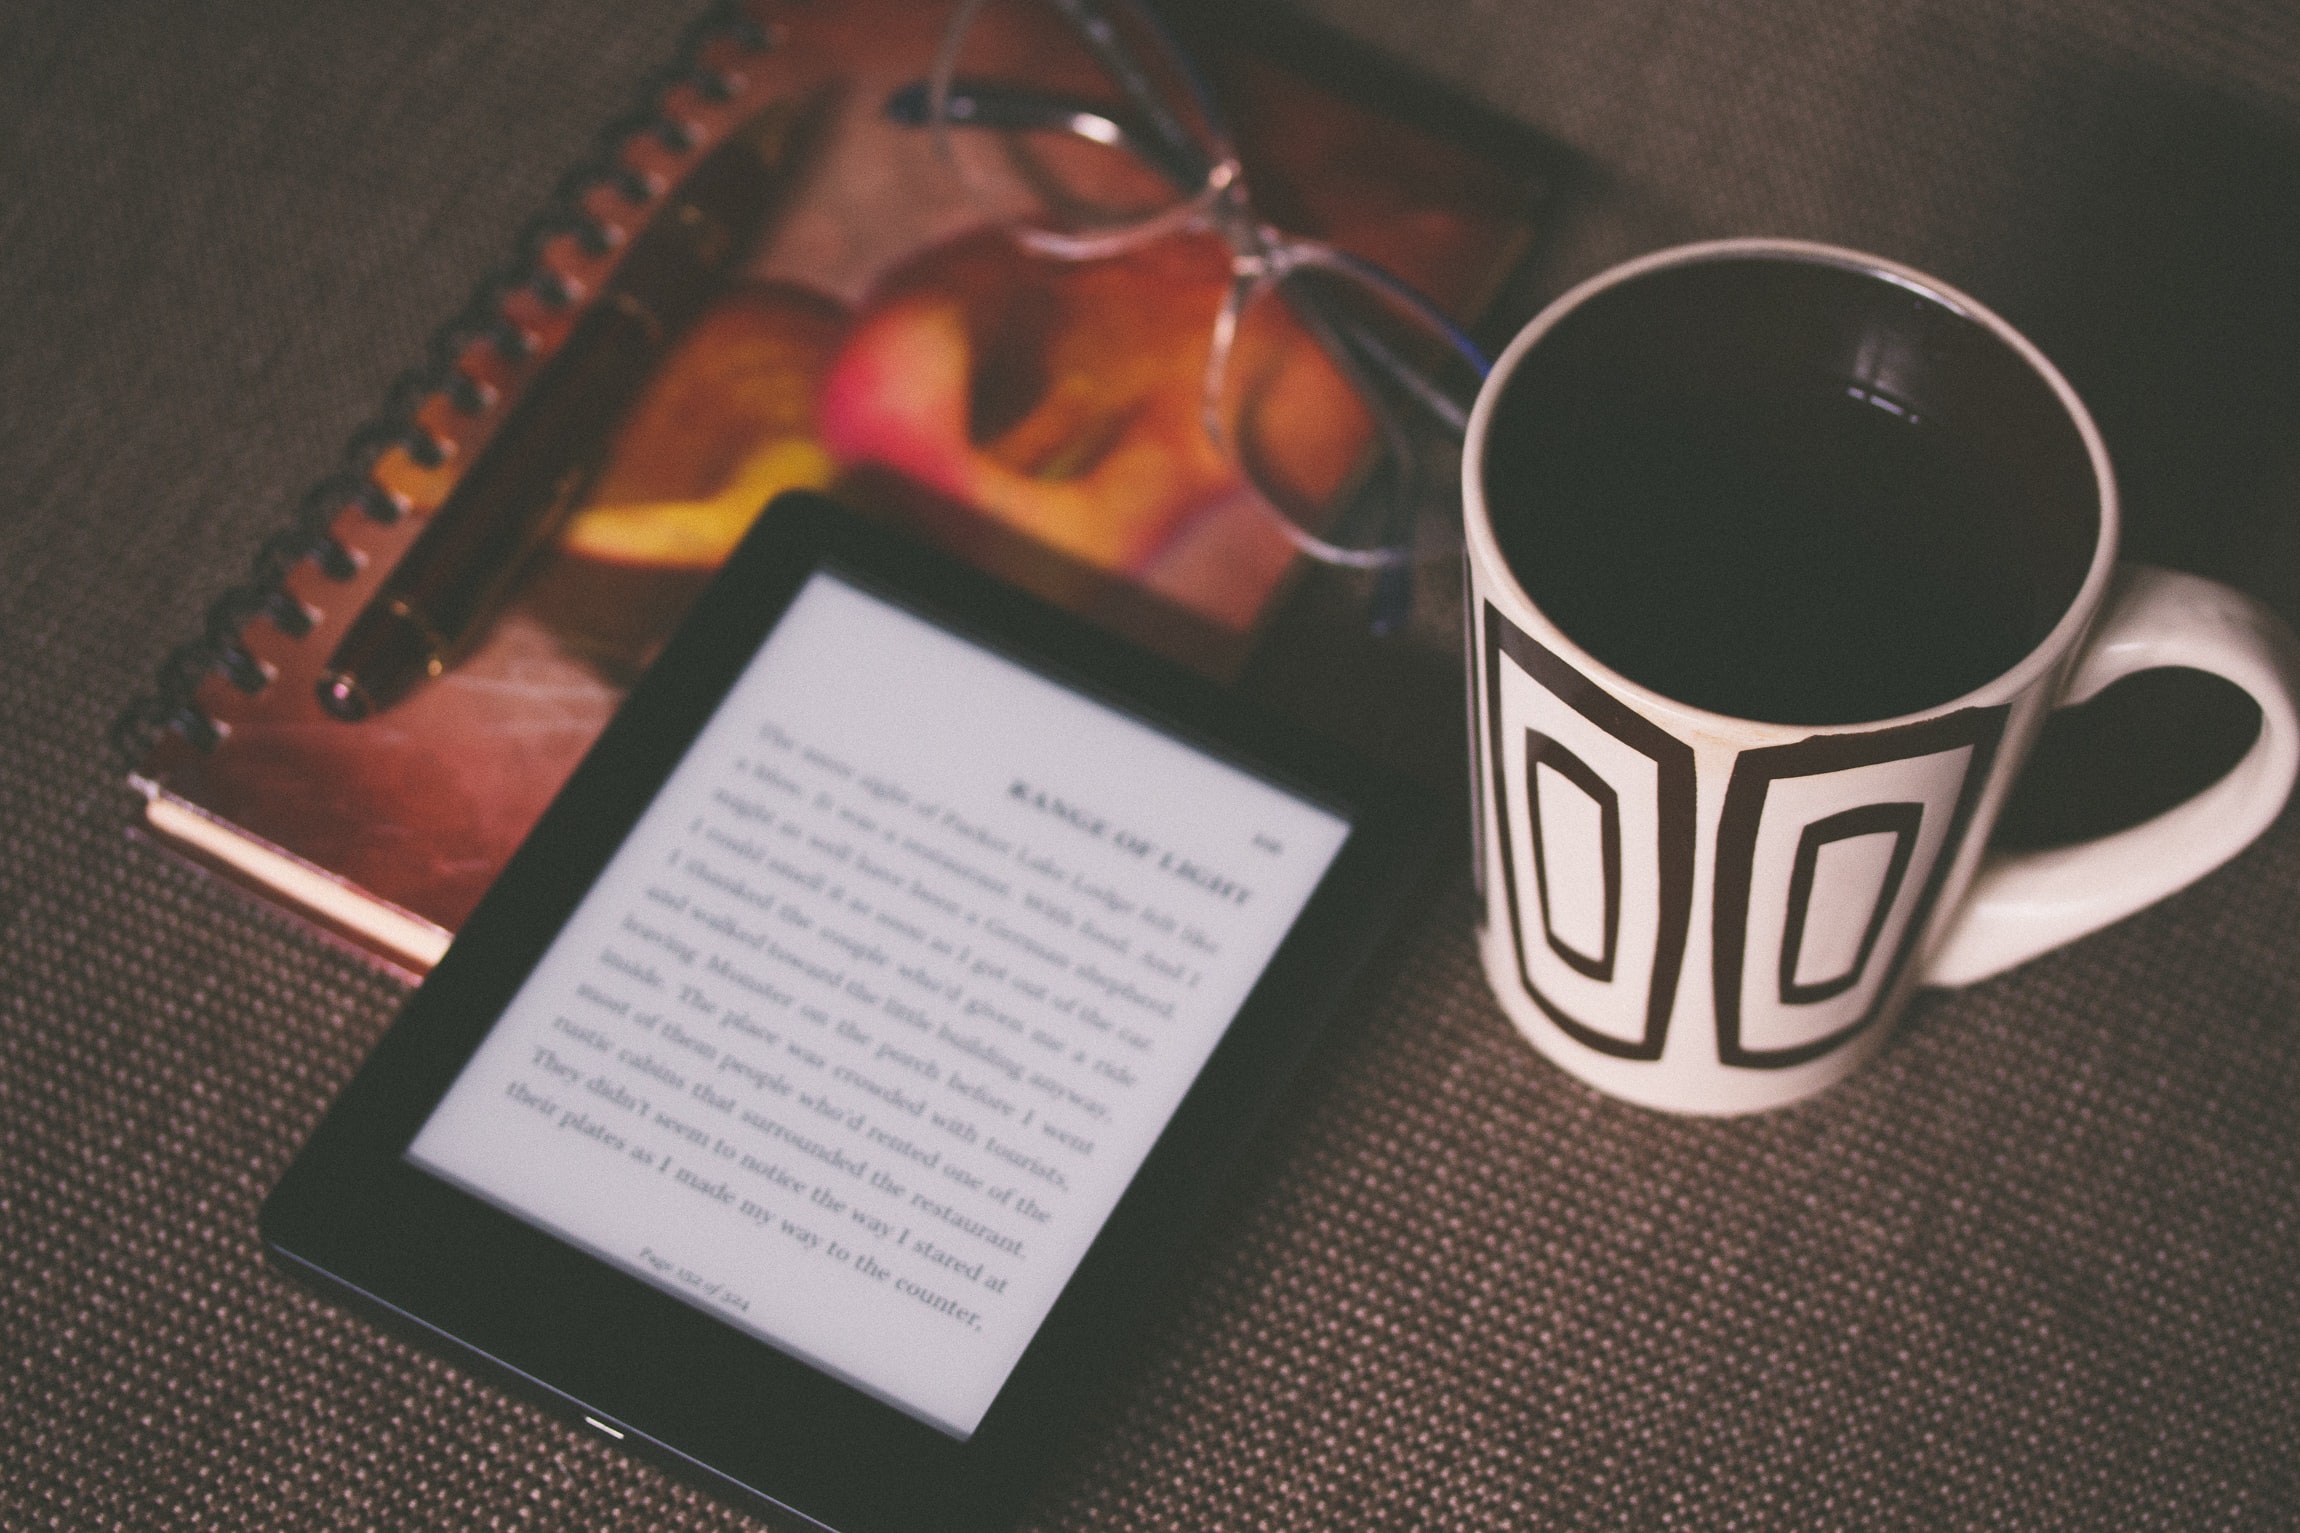 An image of an e-reader on top of a notebook and next to a cup of coffee.